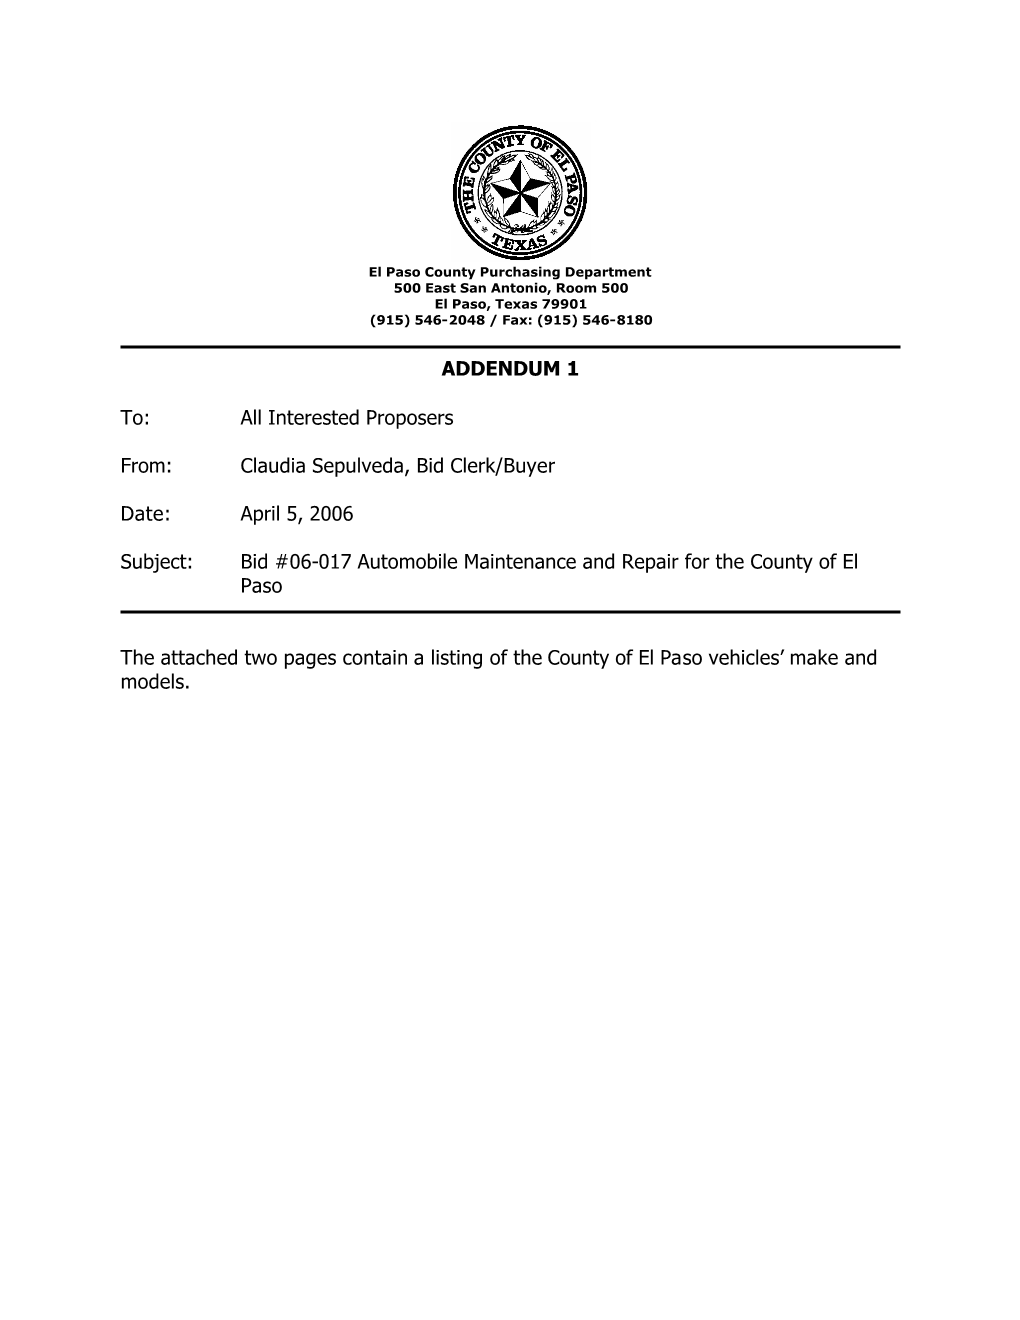 Bid #06-017 Automobile Maintenance and Repair for the County of El Paso